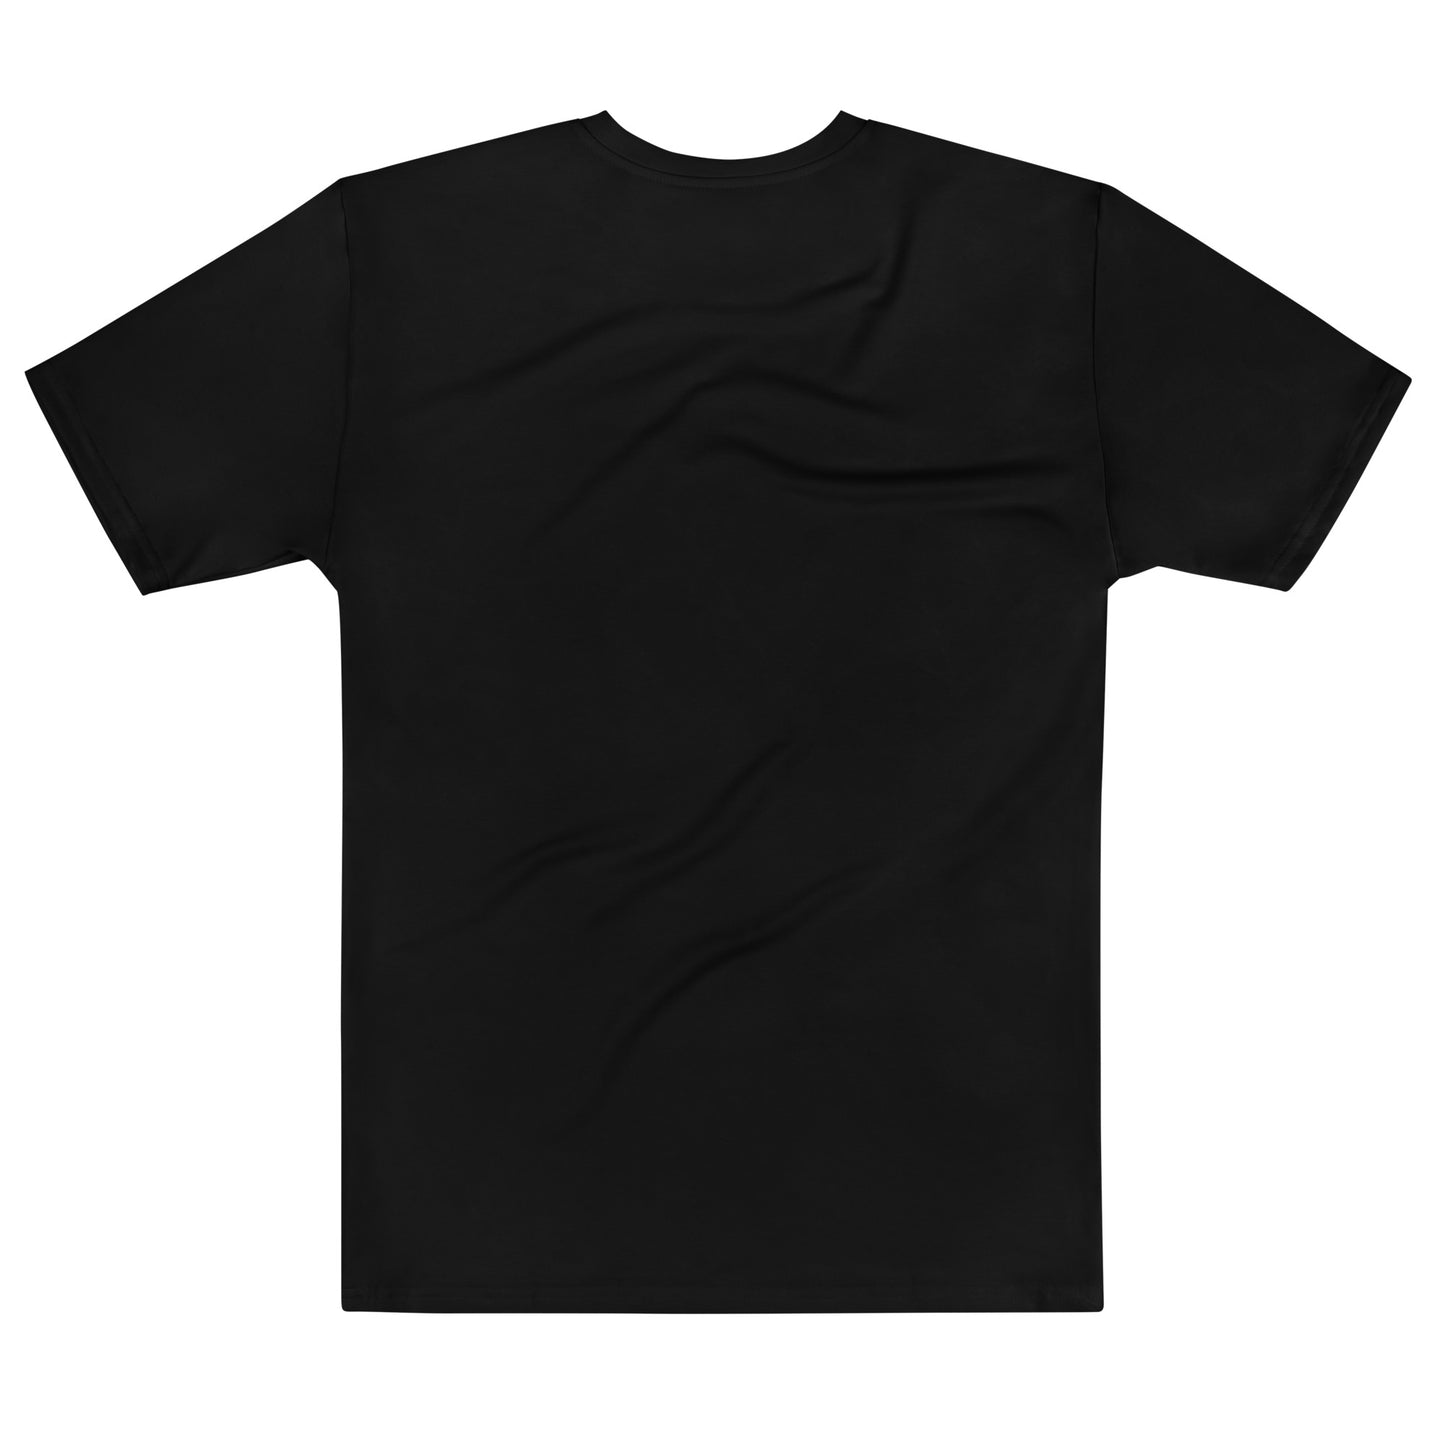 Gutted - Sustainably Made Men's Short Sleeve Tee